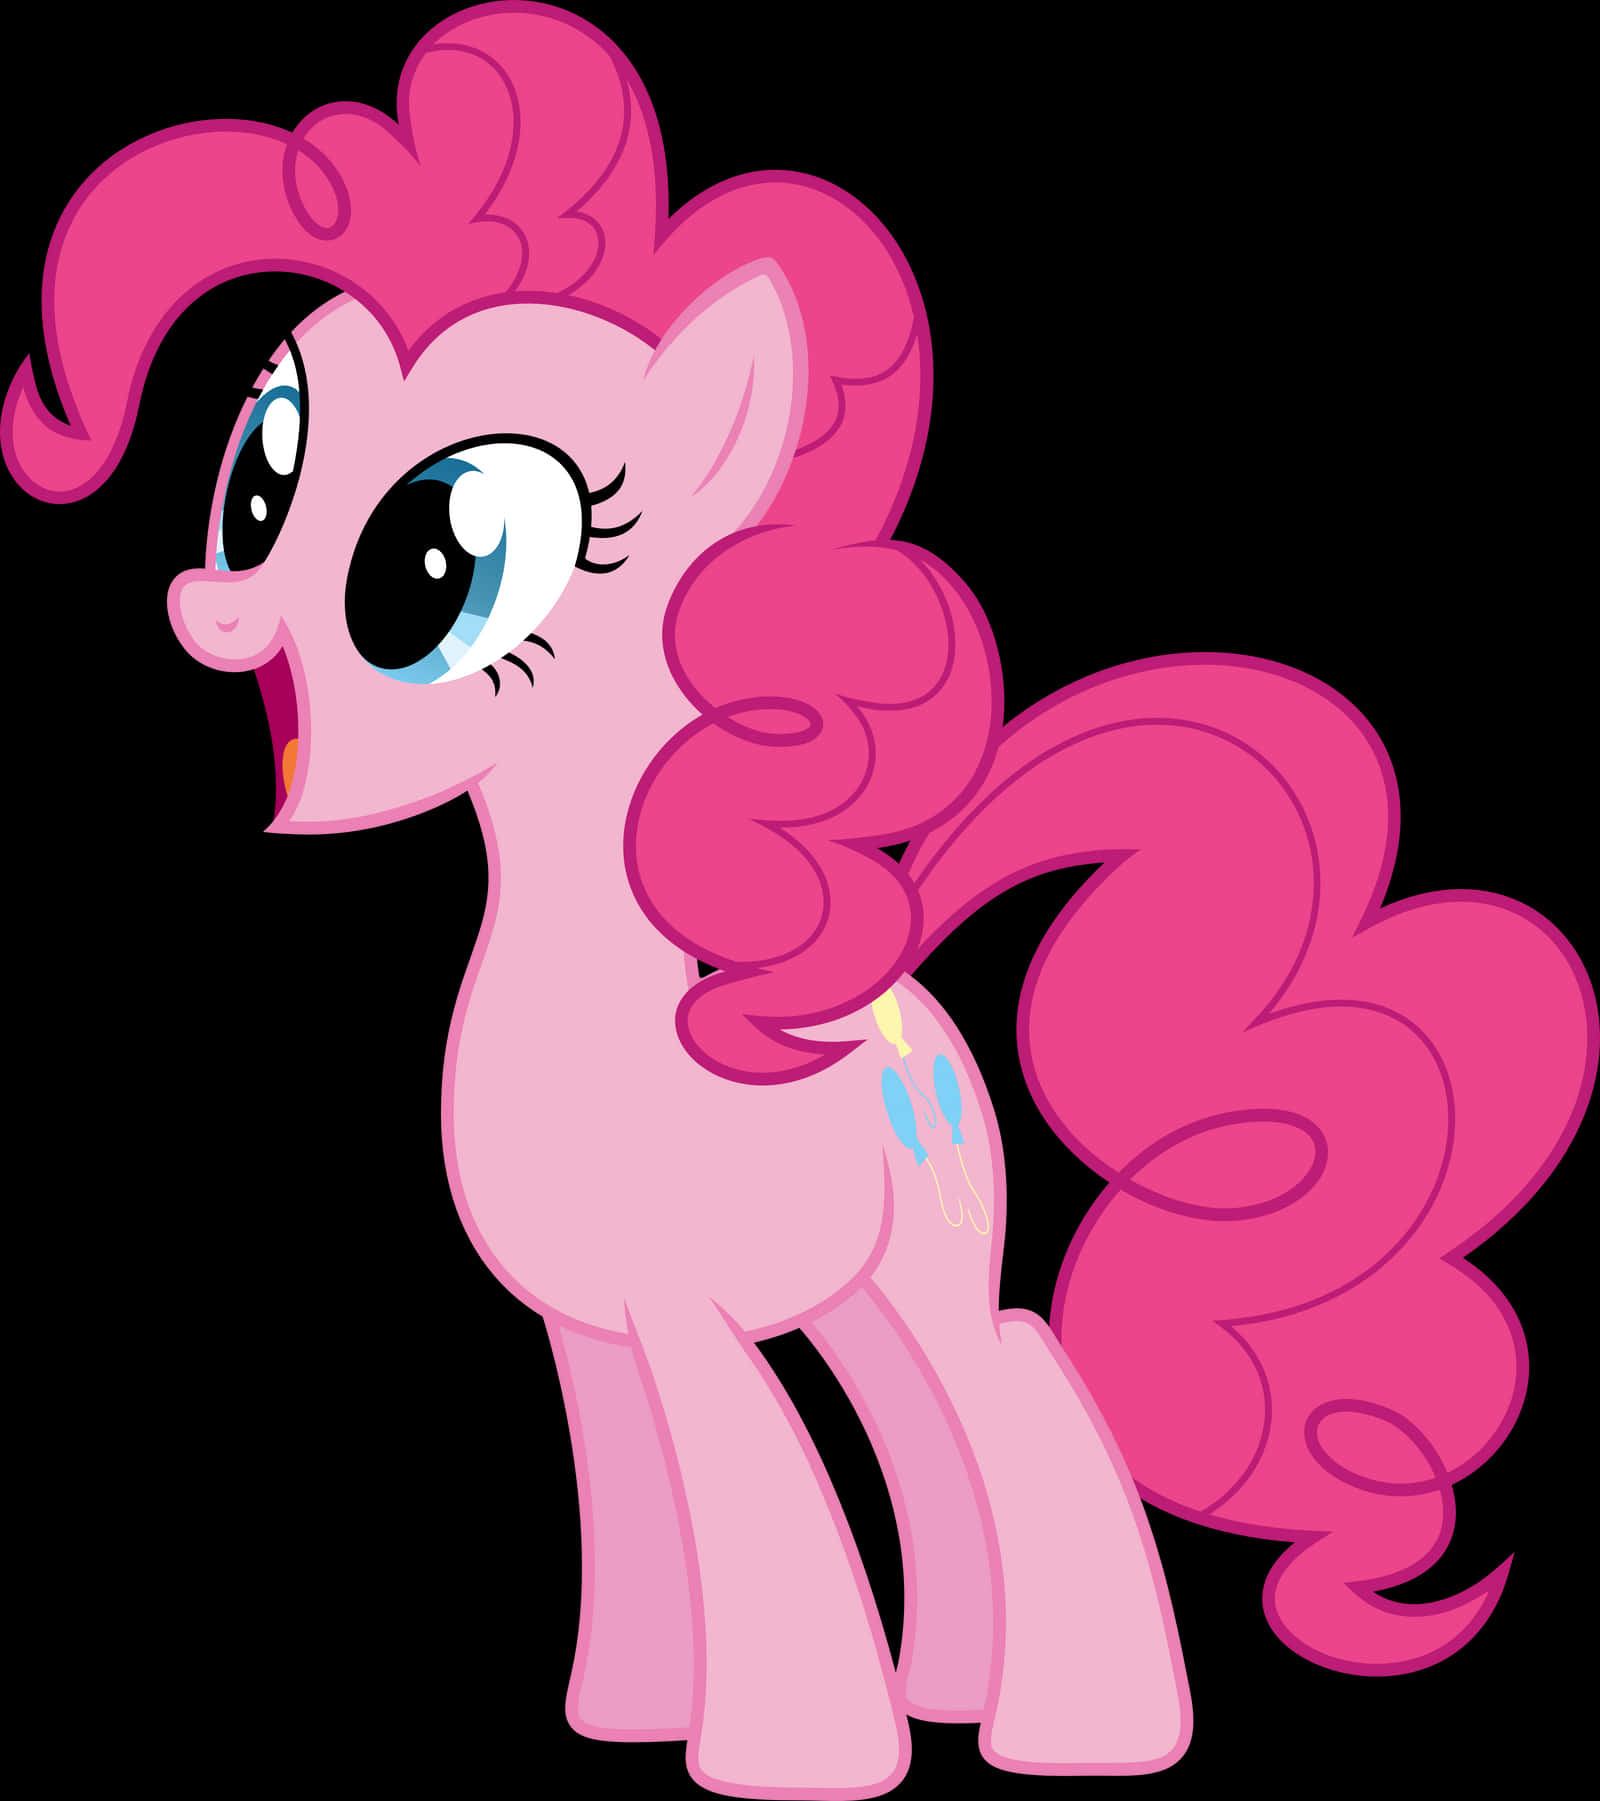 Pinkie Pie spreading some cheer with a cheerful smile.